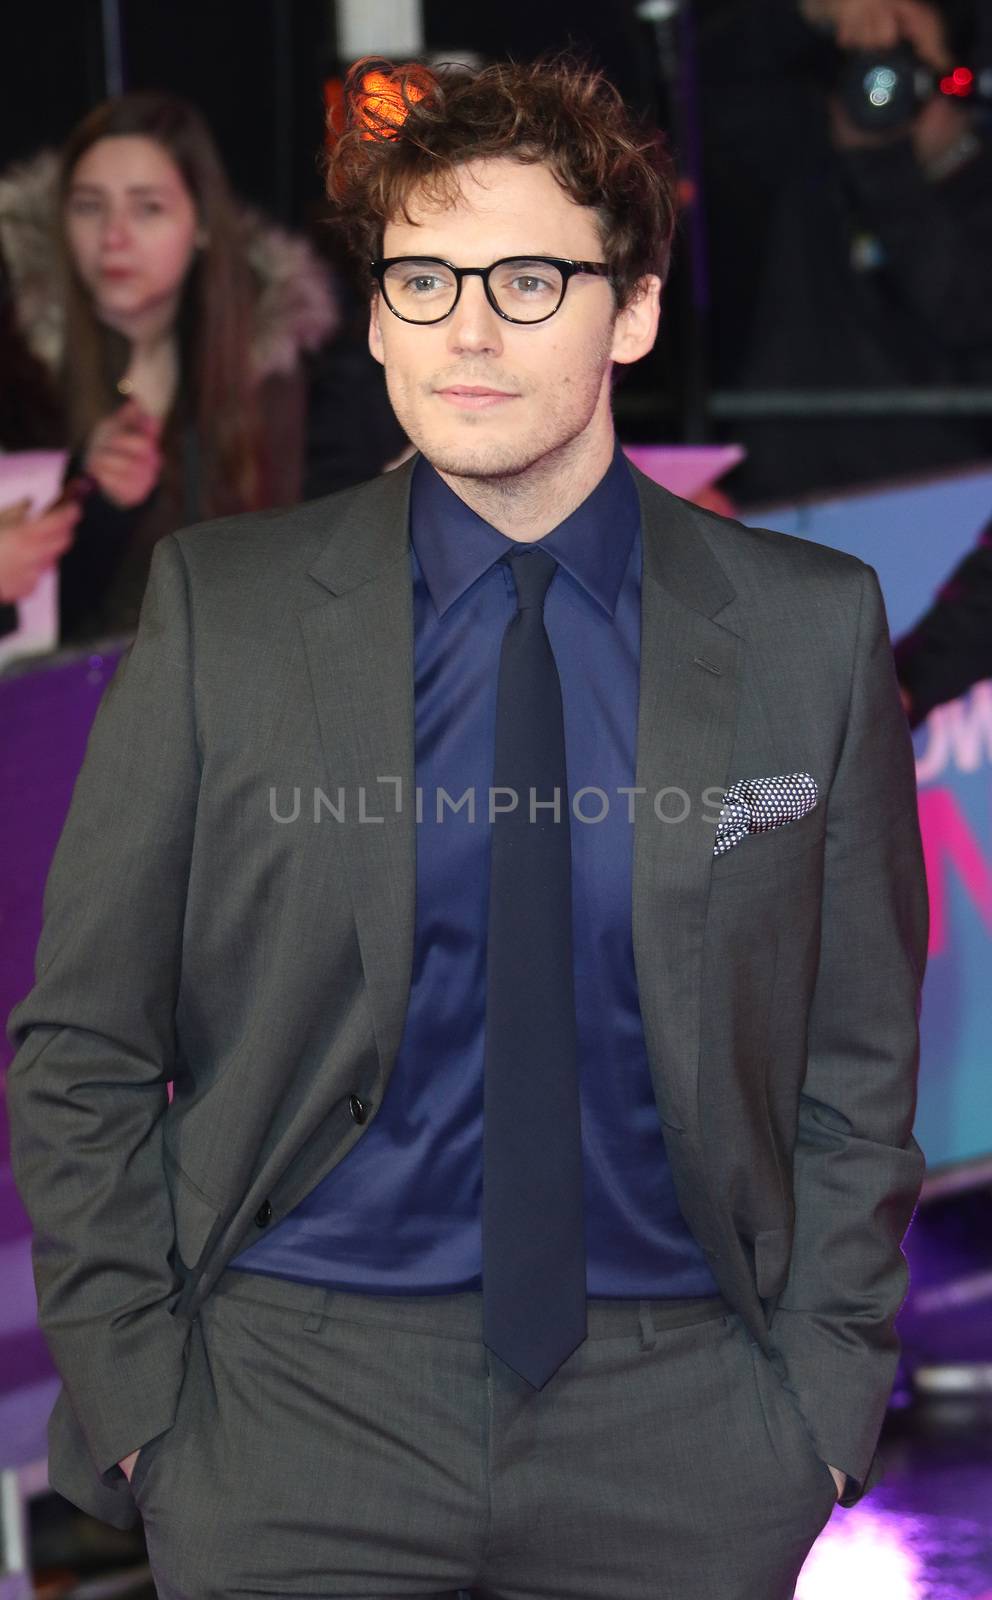 UK, London: Sam Claflin is pictured at How to be single European film premiere at Leicester Square, London on February 9, 2016.